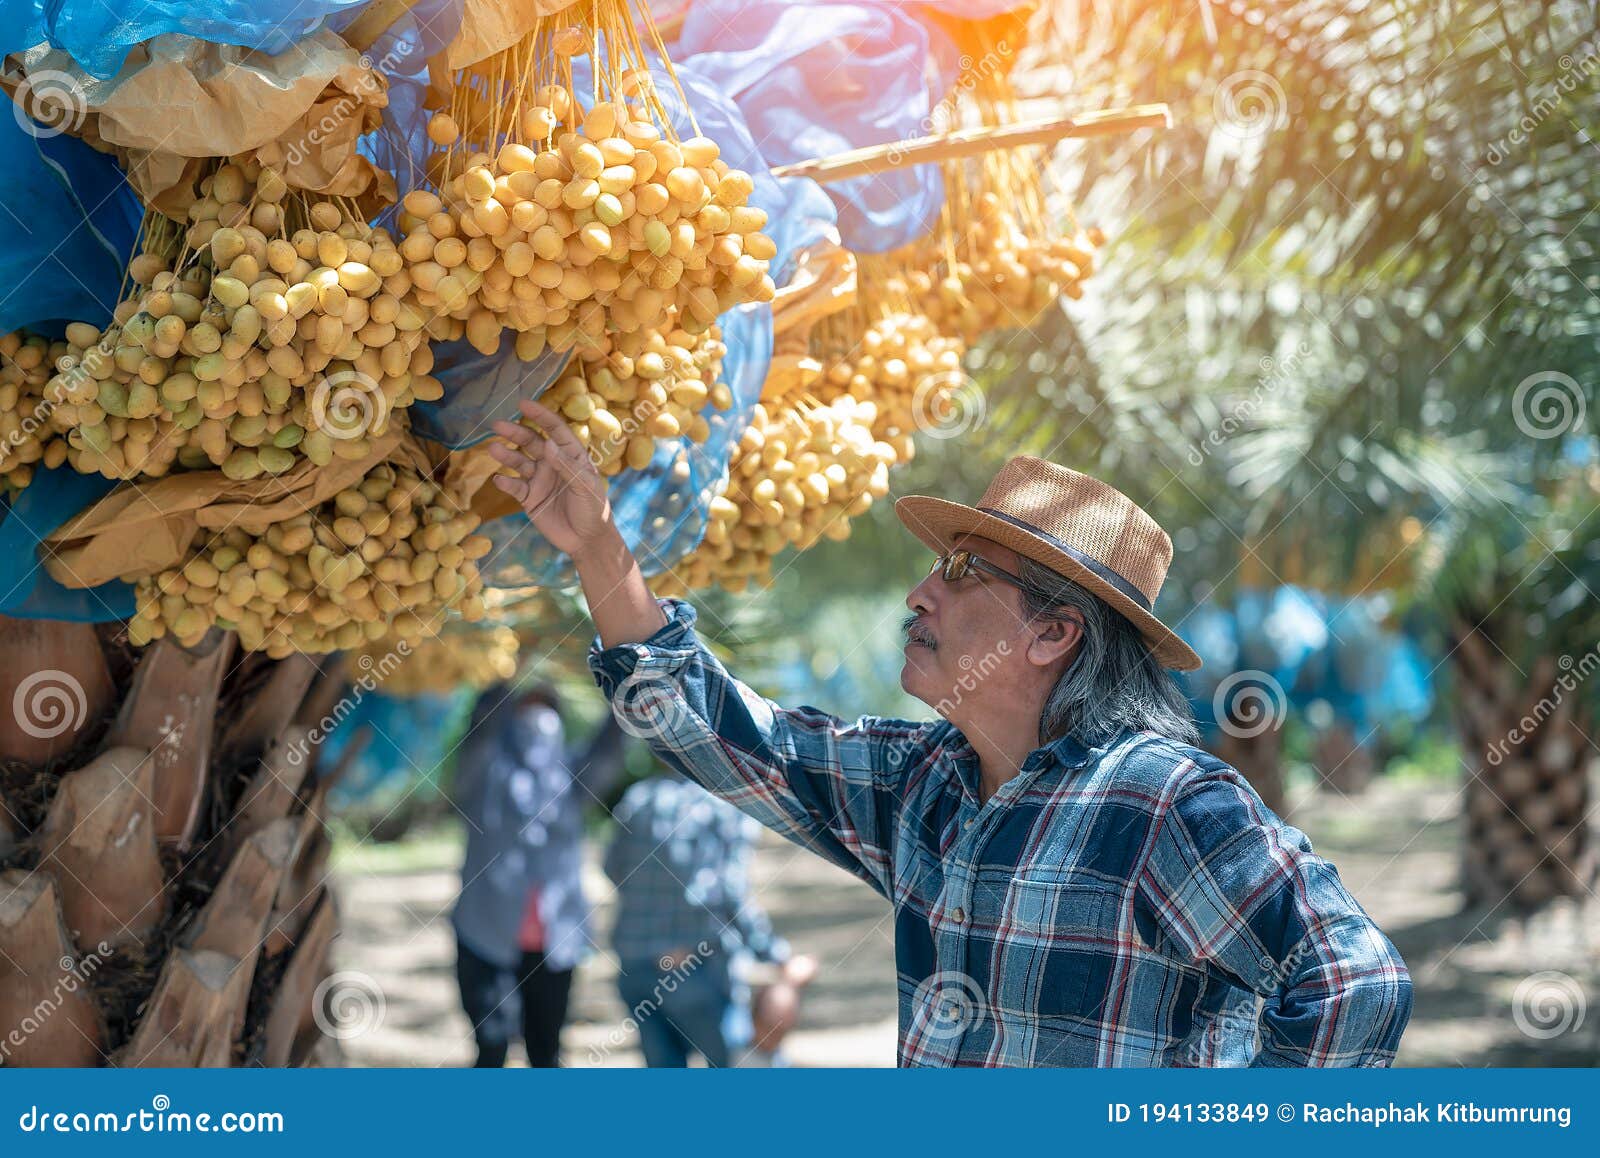 asian farmer carefully checking a bunch of bright yellow ripe dates palm fruits in farm, date palm fruits, agriculturalist